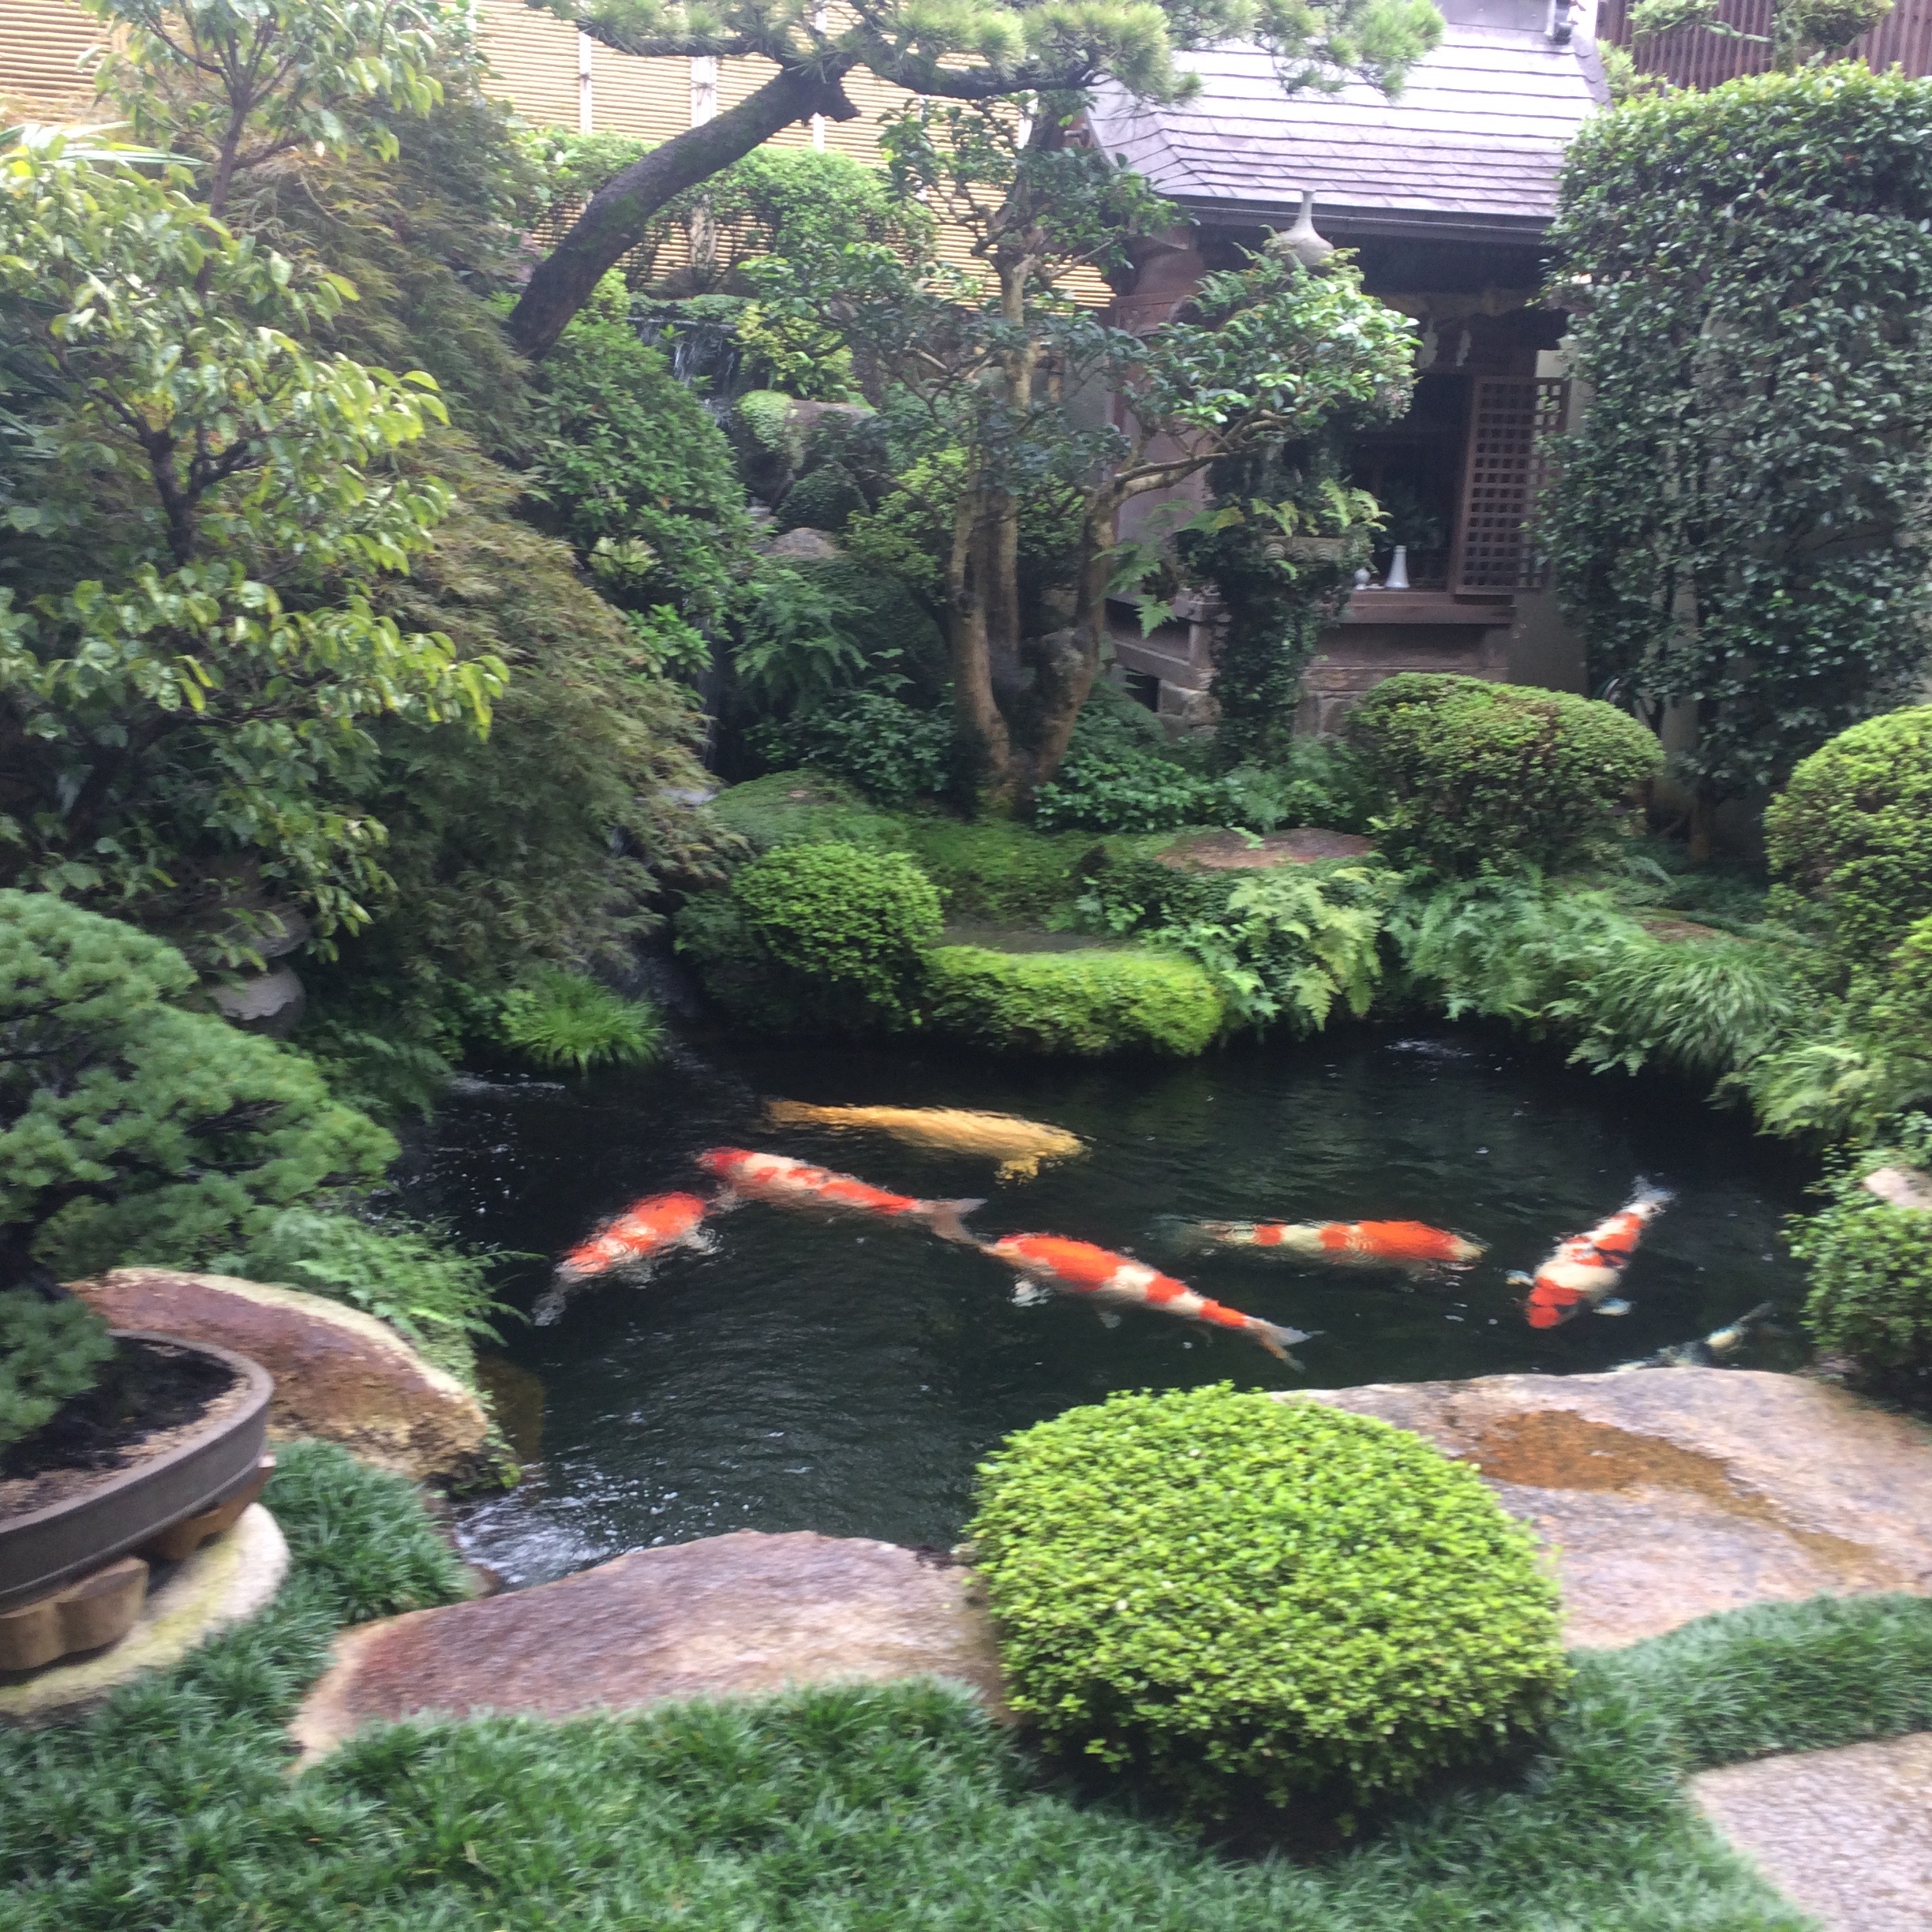 a pond with fish in it